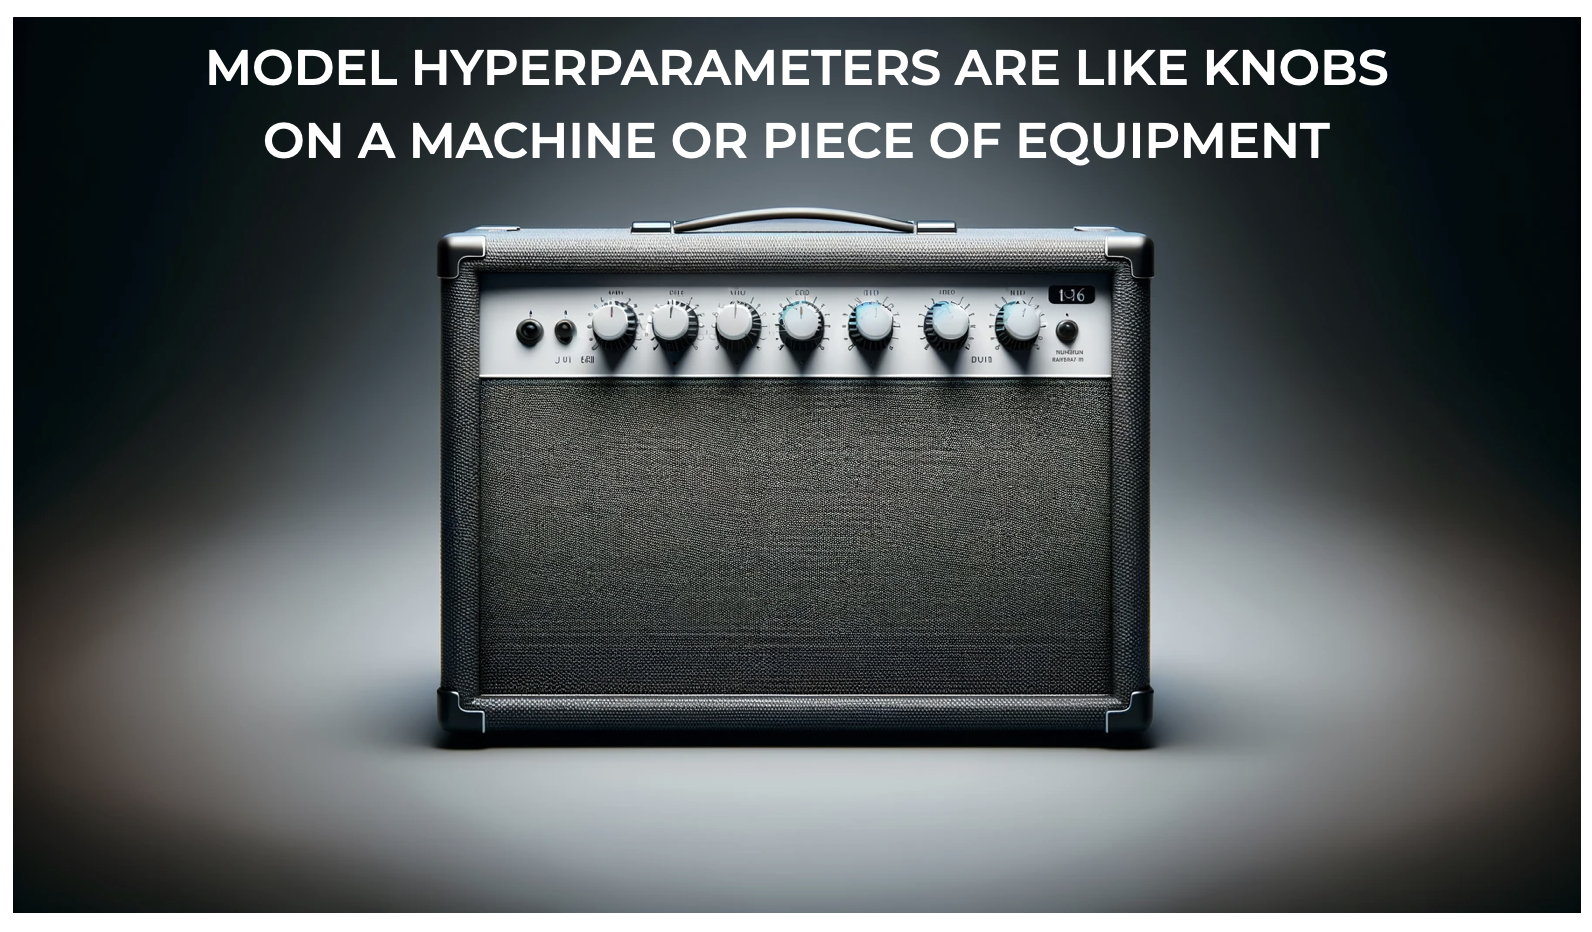 An image of an amplifier with multiple knobs, suggesting that the hyperparameters of a machine learning algorithm are like the knobs and settings on a piece of equipment.